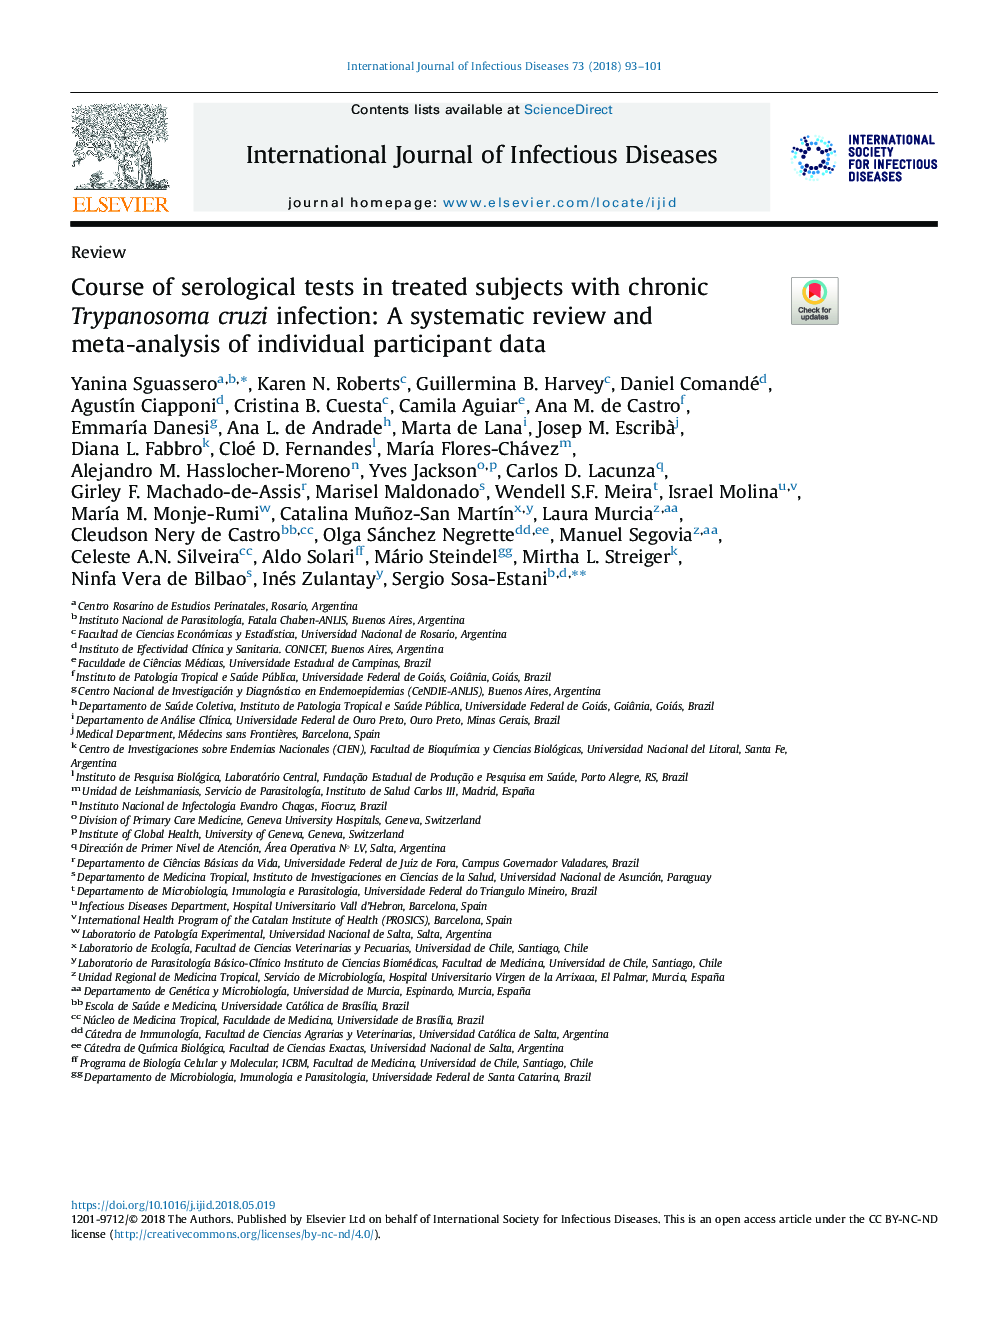 Course of serological tests in treated subjects with chronic Trypanosoma cruzi infection: A systematic review and meta-analysis of individual participant data